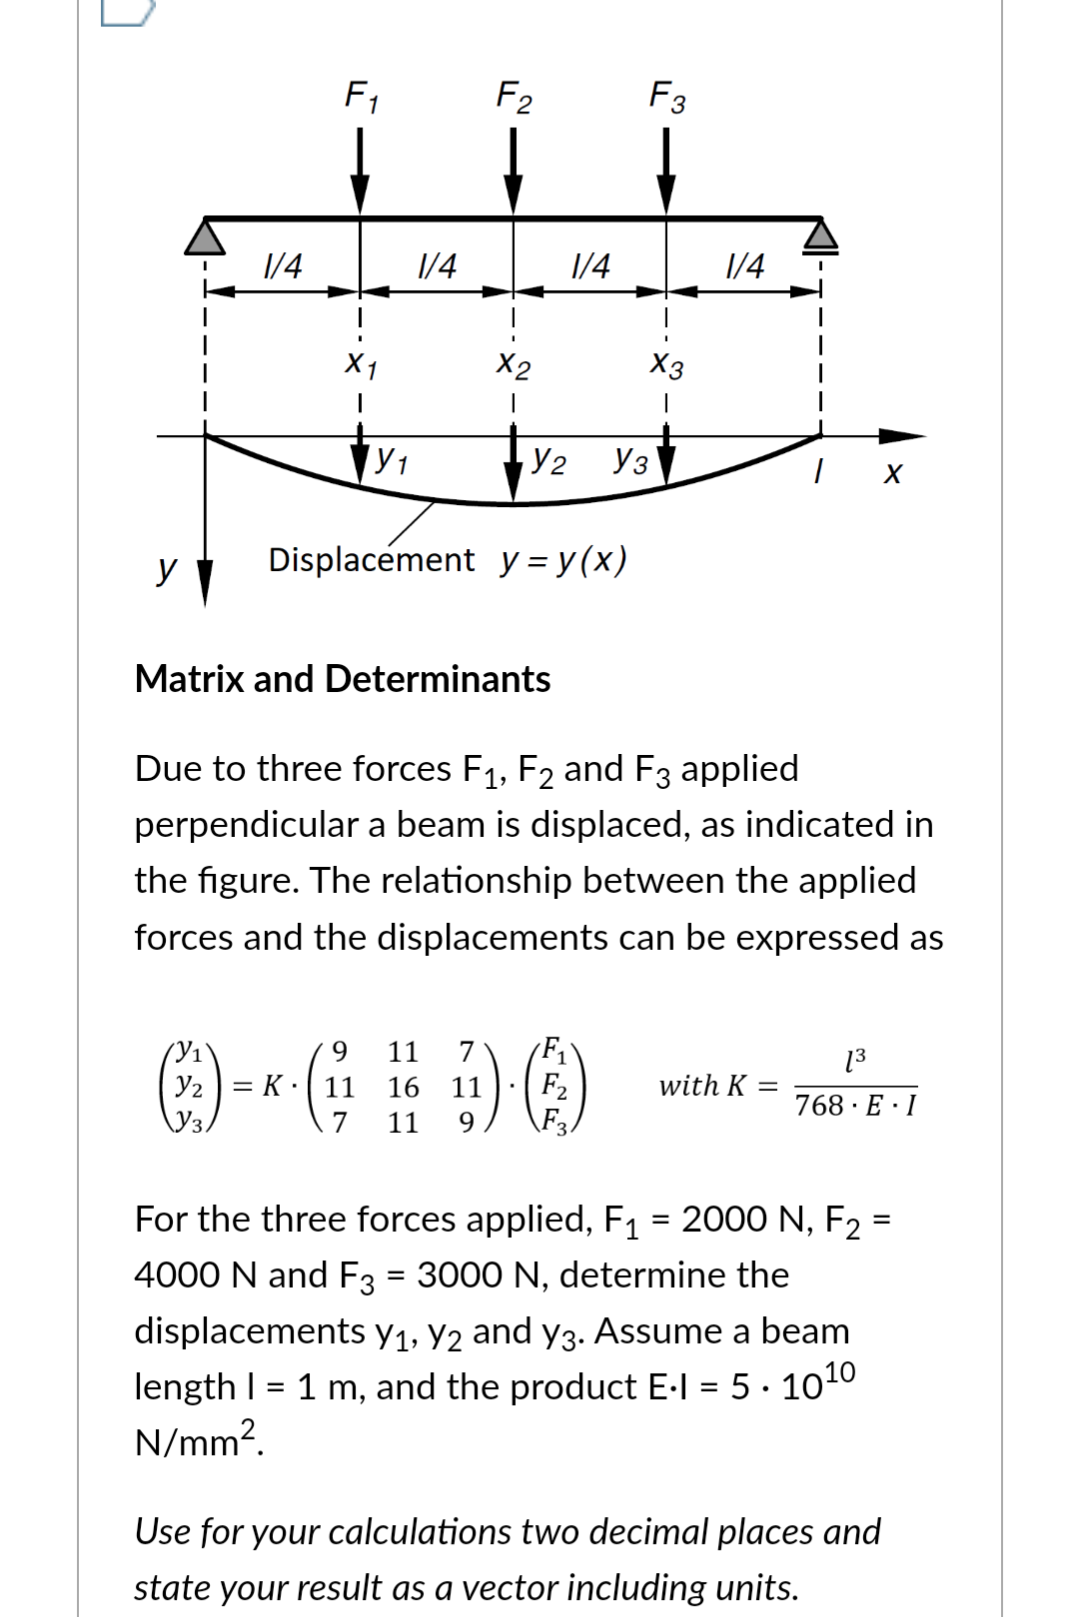 y
1/4
F₁
X1
(У1
Y₂
Y₁
1/4
F2
X2
1
Matrix and Determinants
Displacement y = y(x)
9
11
:) = *- ( ²17 1/4
3
7
11
1/4
Y₂ Уз
F3
X3
1
7
K 11 16 11 F₂
F
Due to three forces F₁, F2 and F3 applied
perpendicular a beam is displaced, as indicated in
1/4
the figure. The relationship between the applied
forces and the displacements can be expressed as
X
with K =
=
[³
768 E I
For the three forces applied, F₁ = 2000 N, F₂ =
4000 N and F3 = 3000 N, determine the
displacements y₁, Y2 and y3. Assume a beam
length | = 1 m, and the product E-I = 5.10¹0
N/mm².
Use for your calculations two decimal places and
state your result as a vector including units.